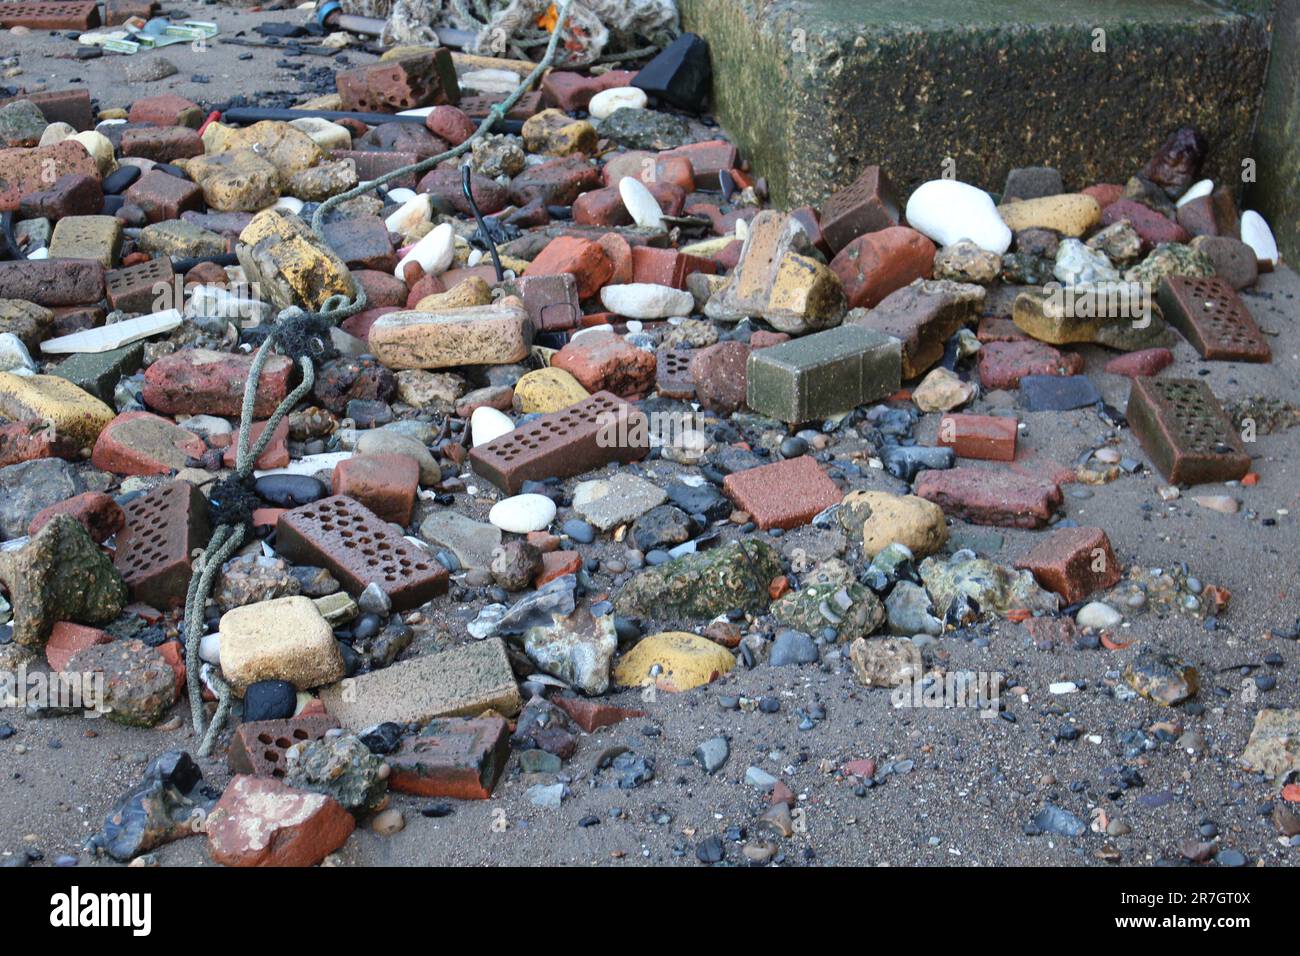 Pollution washed assure onto the beach - environmental harm to wildlife and its eco system - In London along the River Thames Stock Photo